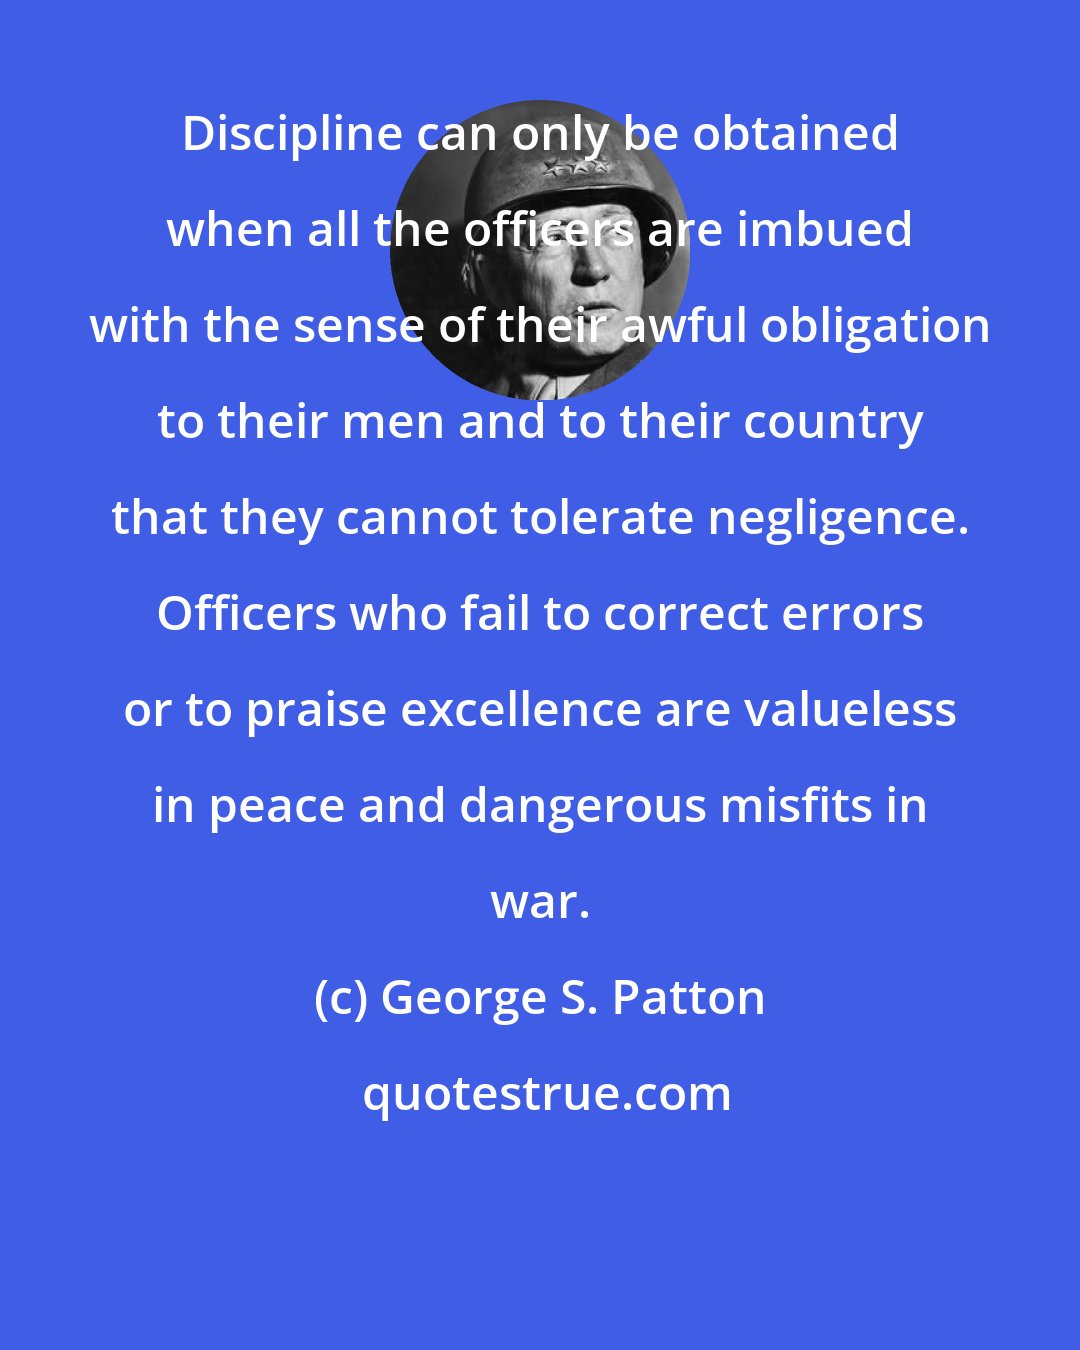 George S. Patton: Discipline can only be obtained when all the officers are imbued with the sense of their awful obligation to their men and to their country that they cannot tolerate negligence. Officers who fail to correct errors or to praise excellence are valueless in peace and dangerous misfits in war.